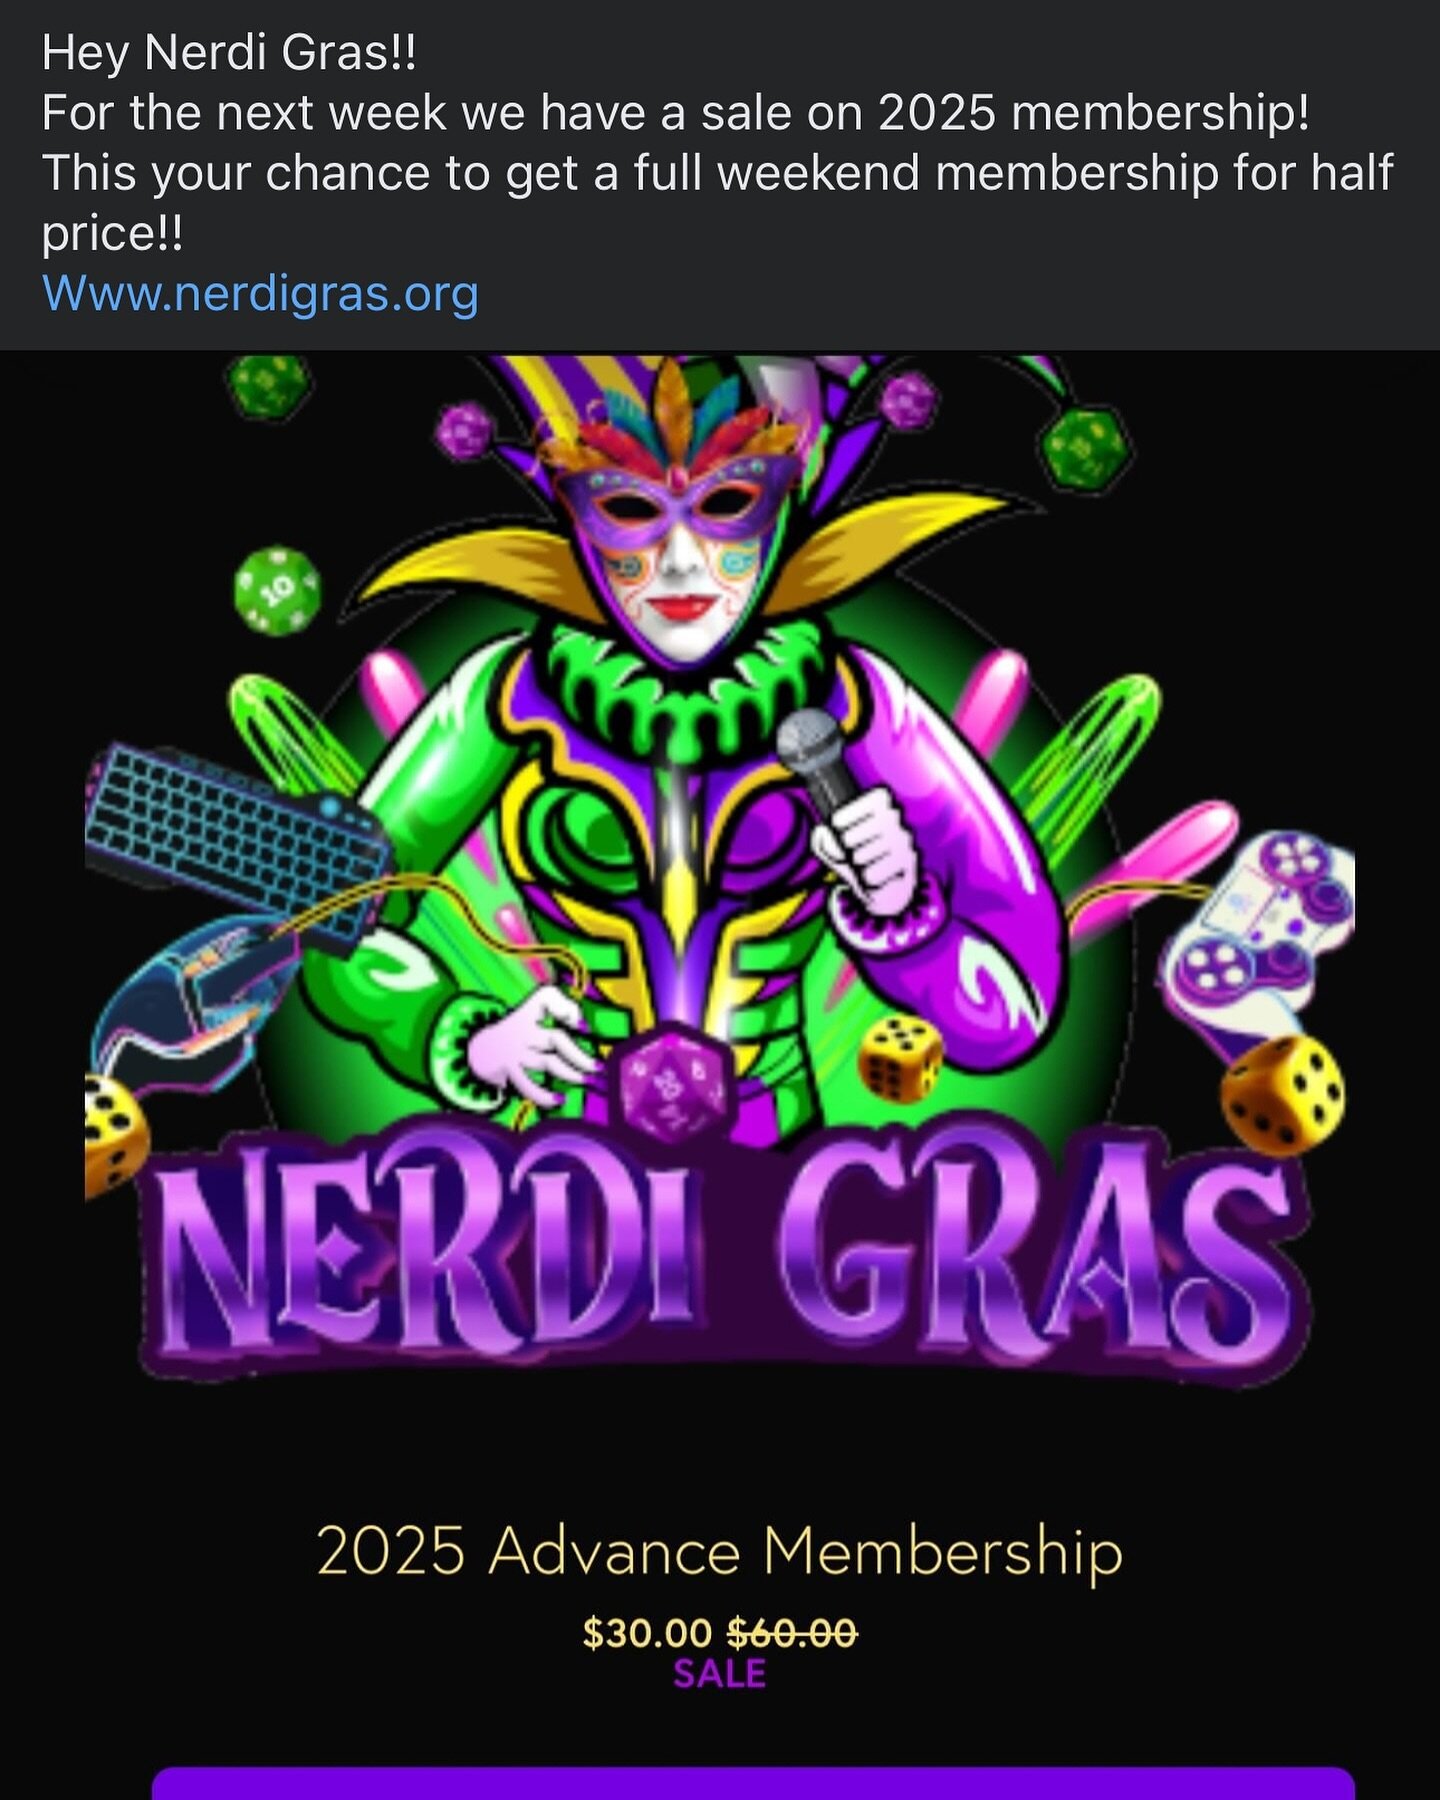 Only two more days left on the pre reg sale!! Get your super discounted 2025 membership before it&rsquo;s too late! Www.nerdigras.org #nerdigras